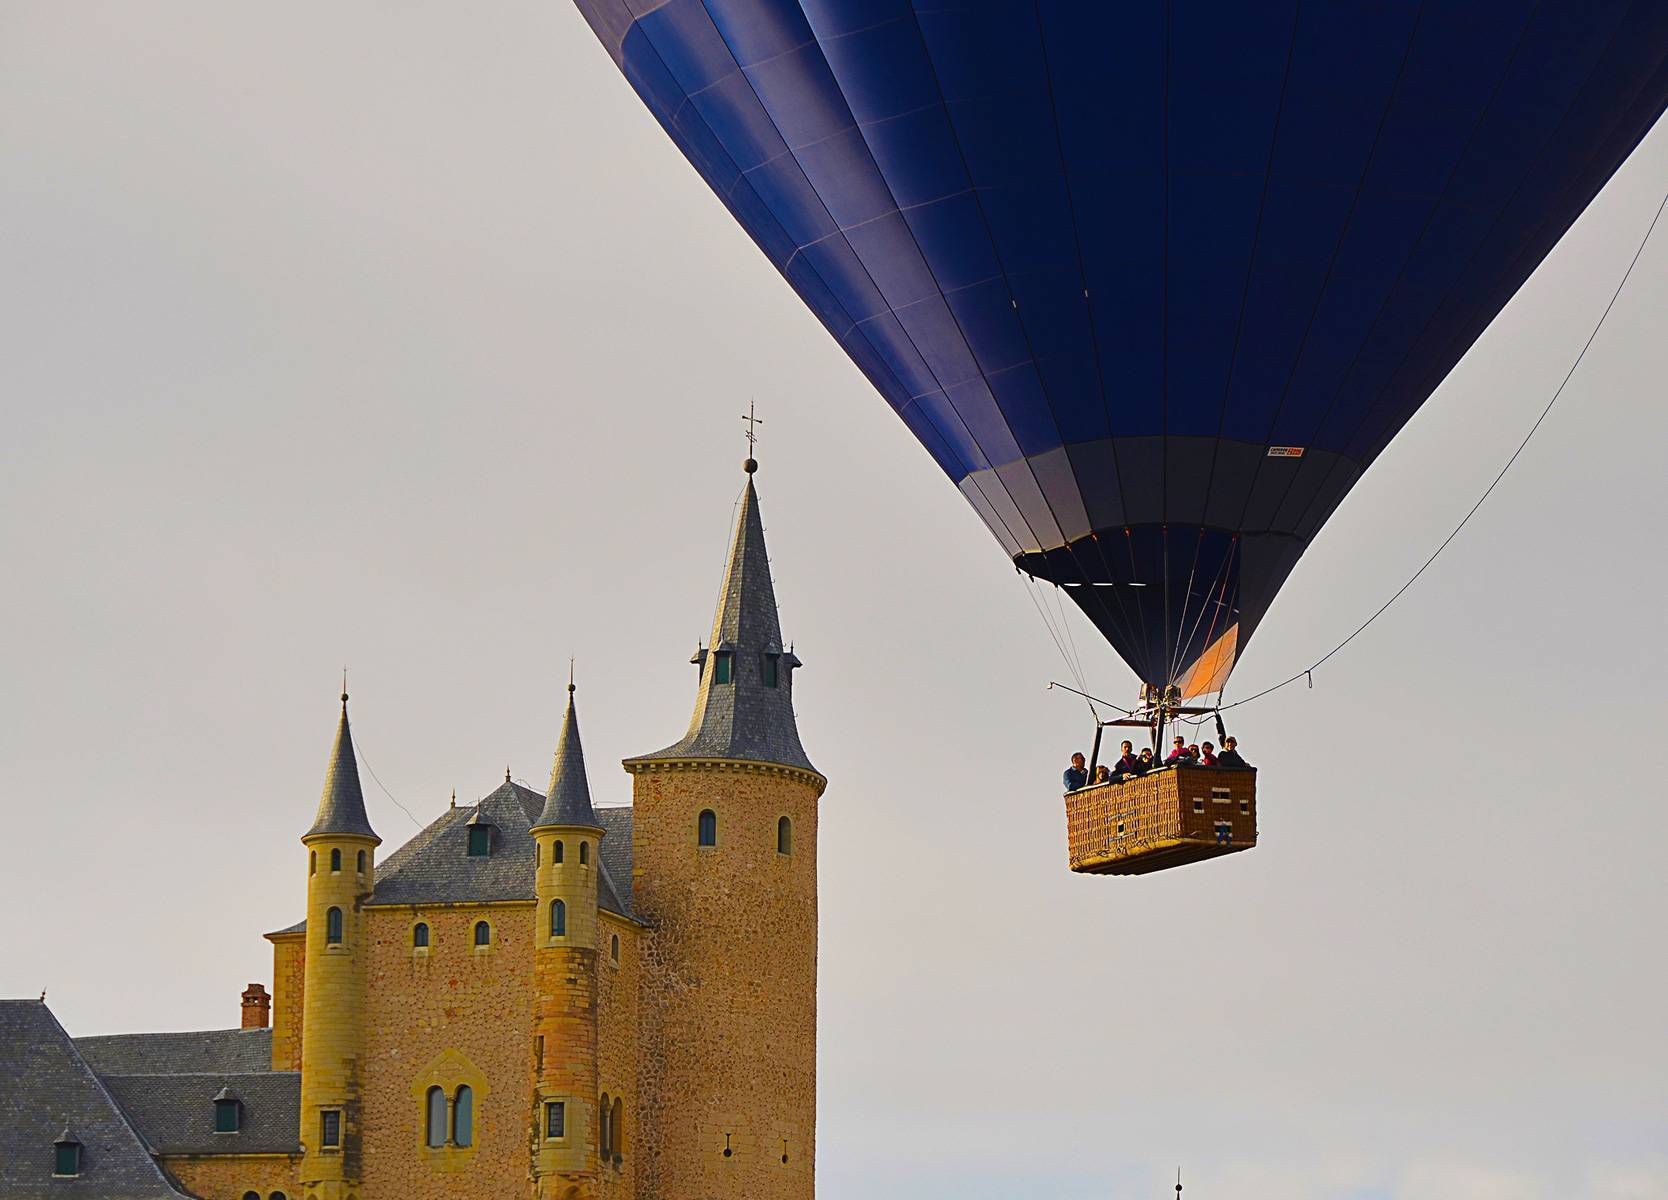 FLYING ON A BALLOON IN SEGOVIA